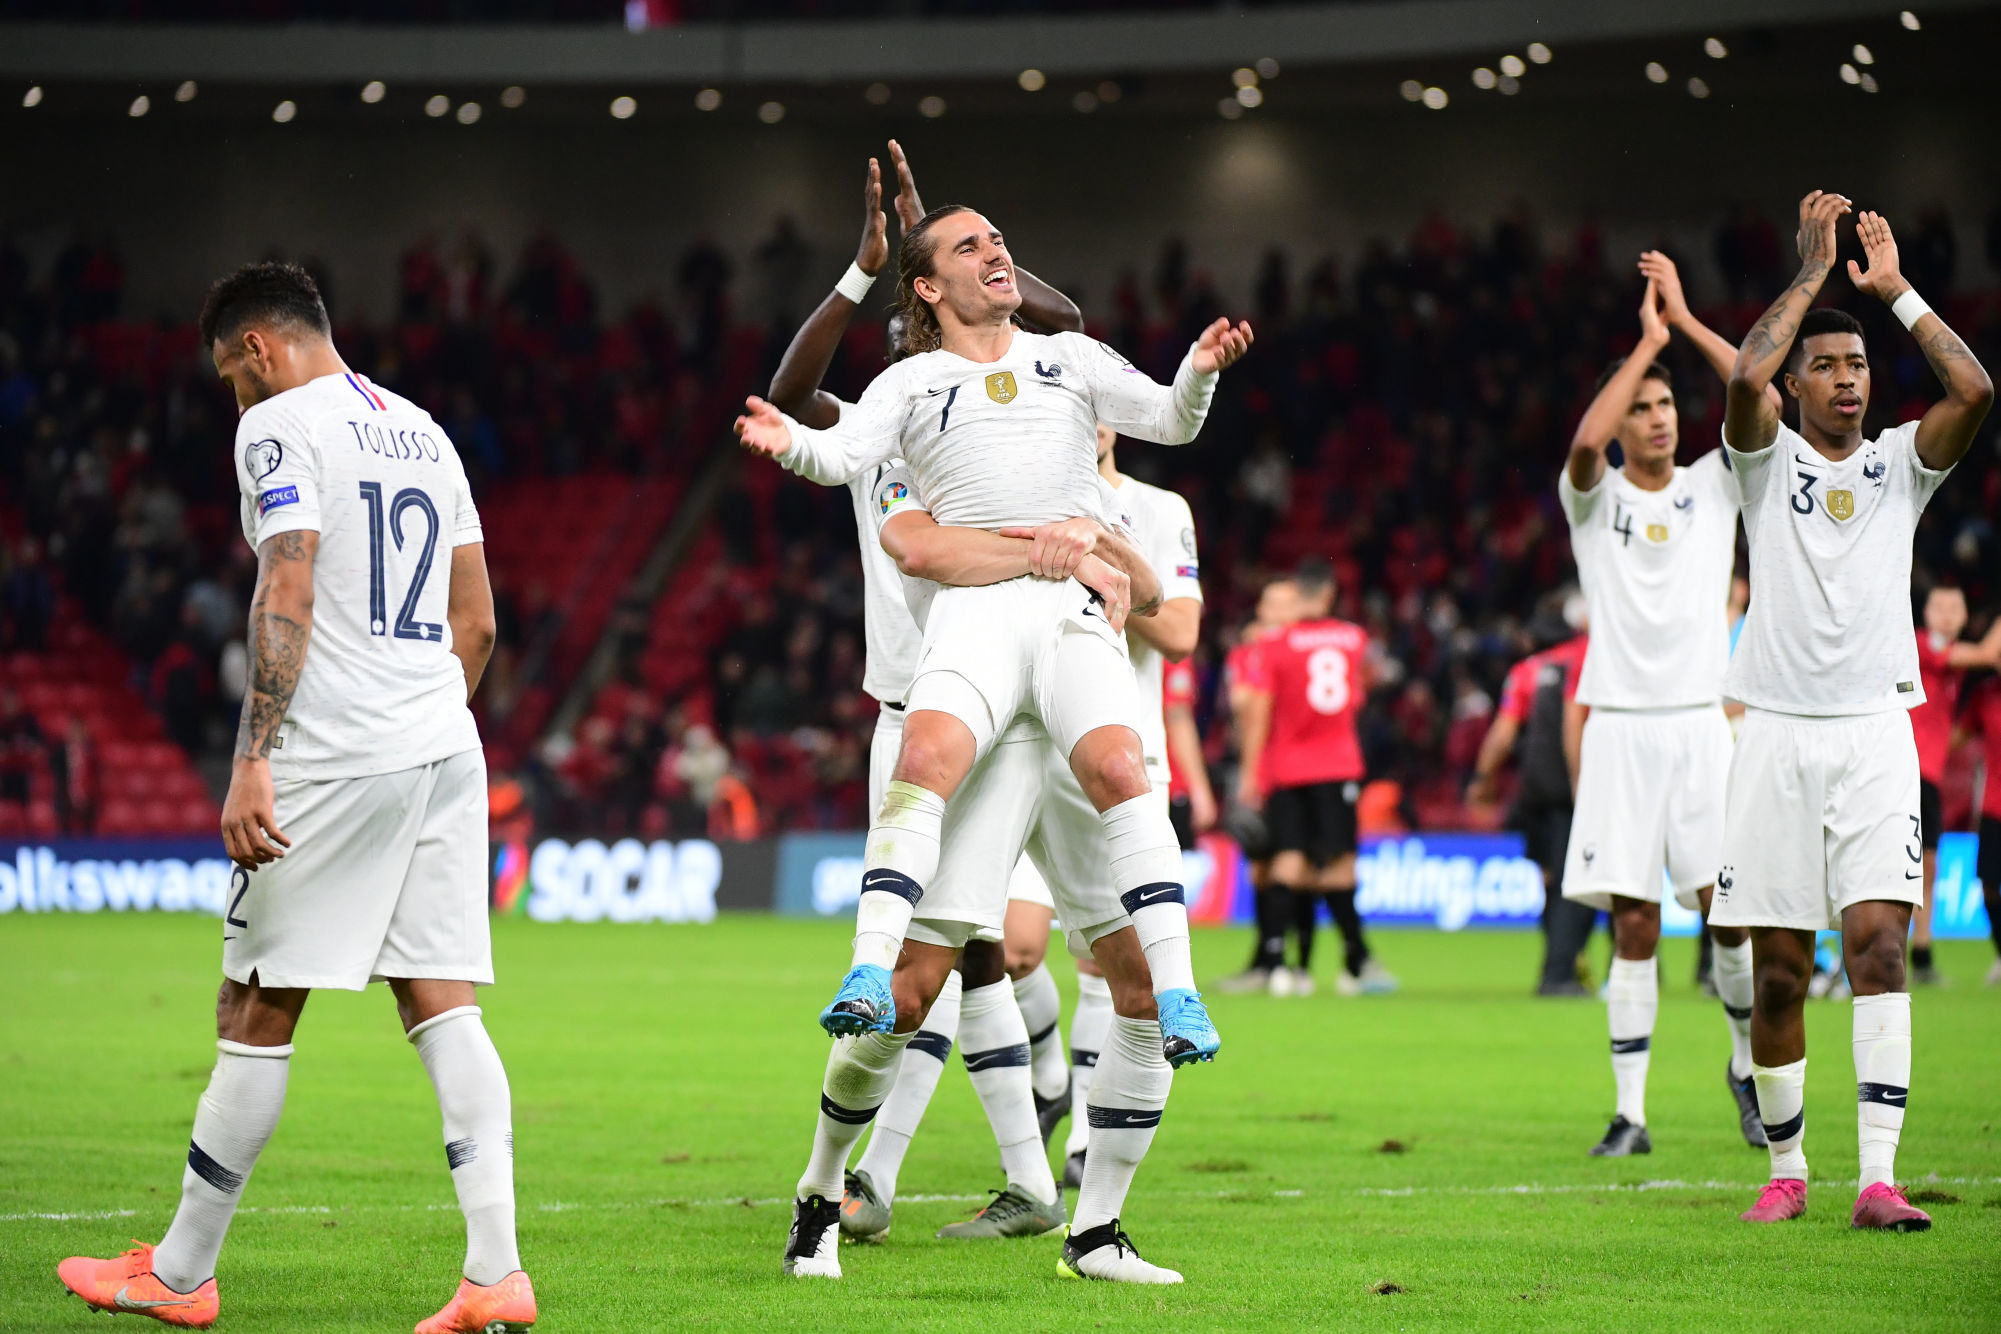 Antoine GRIEZMANN of France celebrates following during the Euro 2020 Group H qualifying match between Albania and France at the Arena Kombetare on November 17, 2019 in Tirana, Albania. (Photo by Dave Winter/Icon Sport) - Antoine GRIEZMANN - Arena Kombetare - Tirana (Albanie)